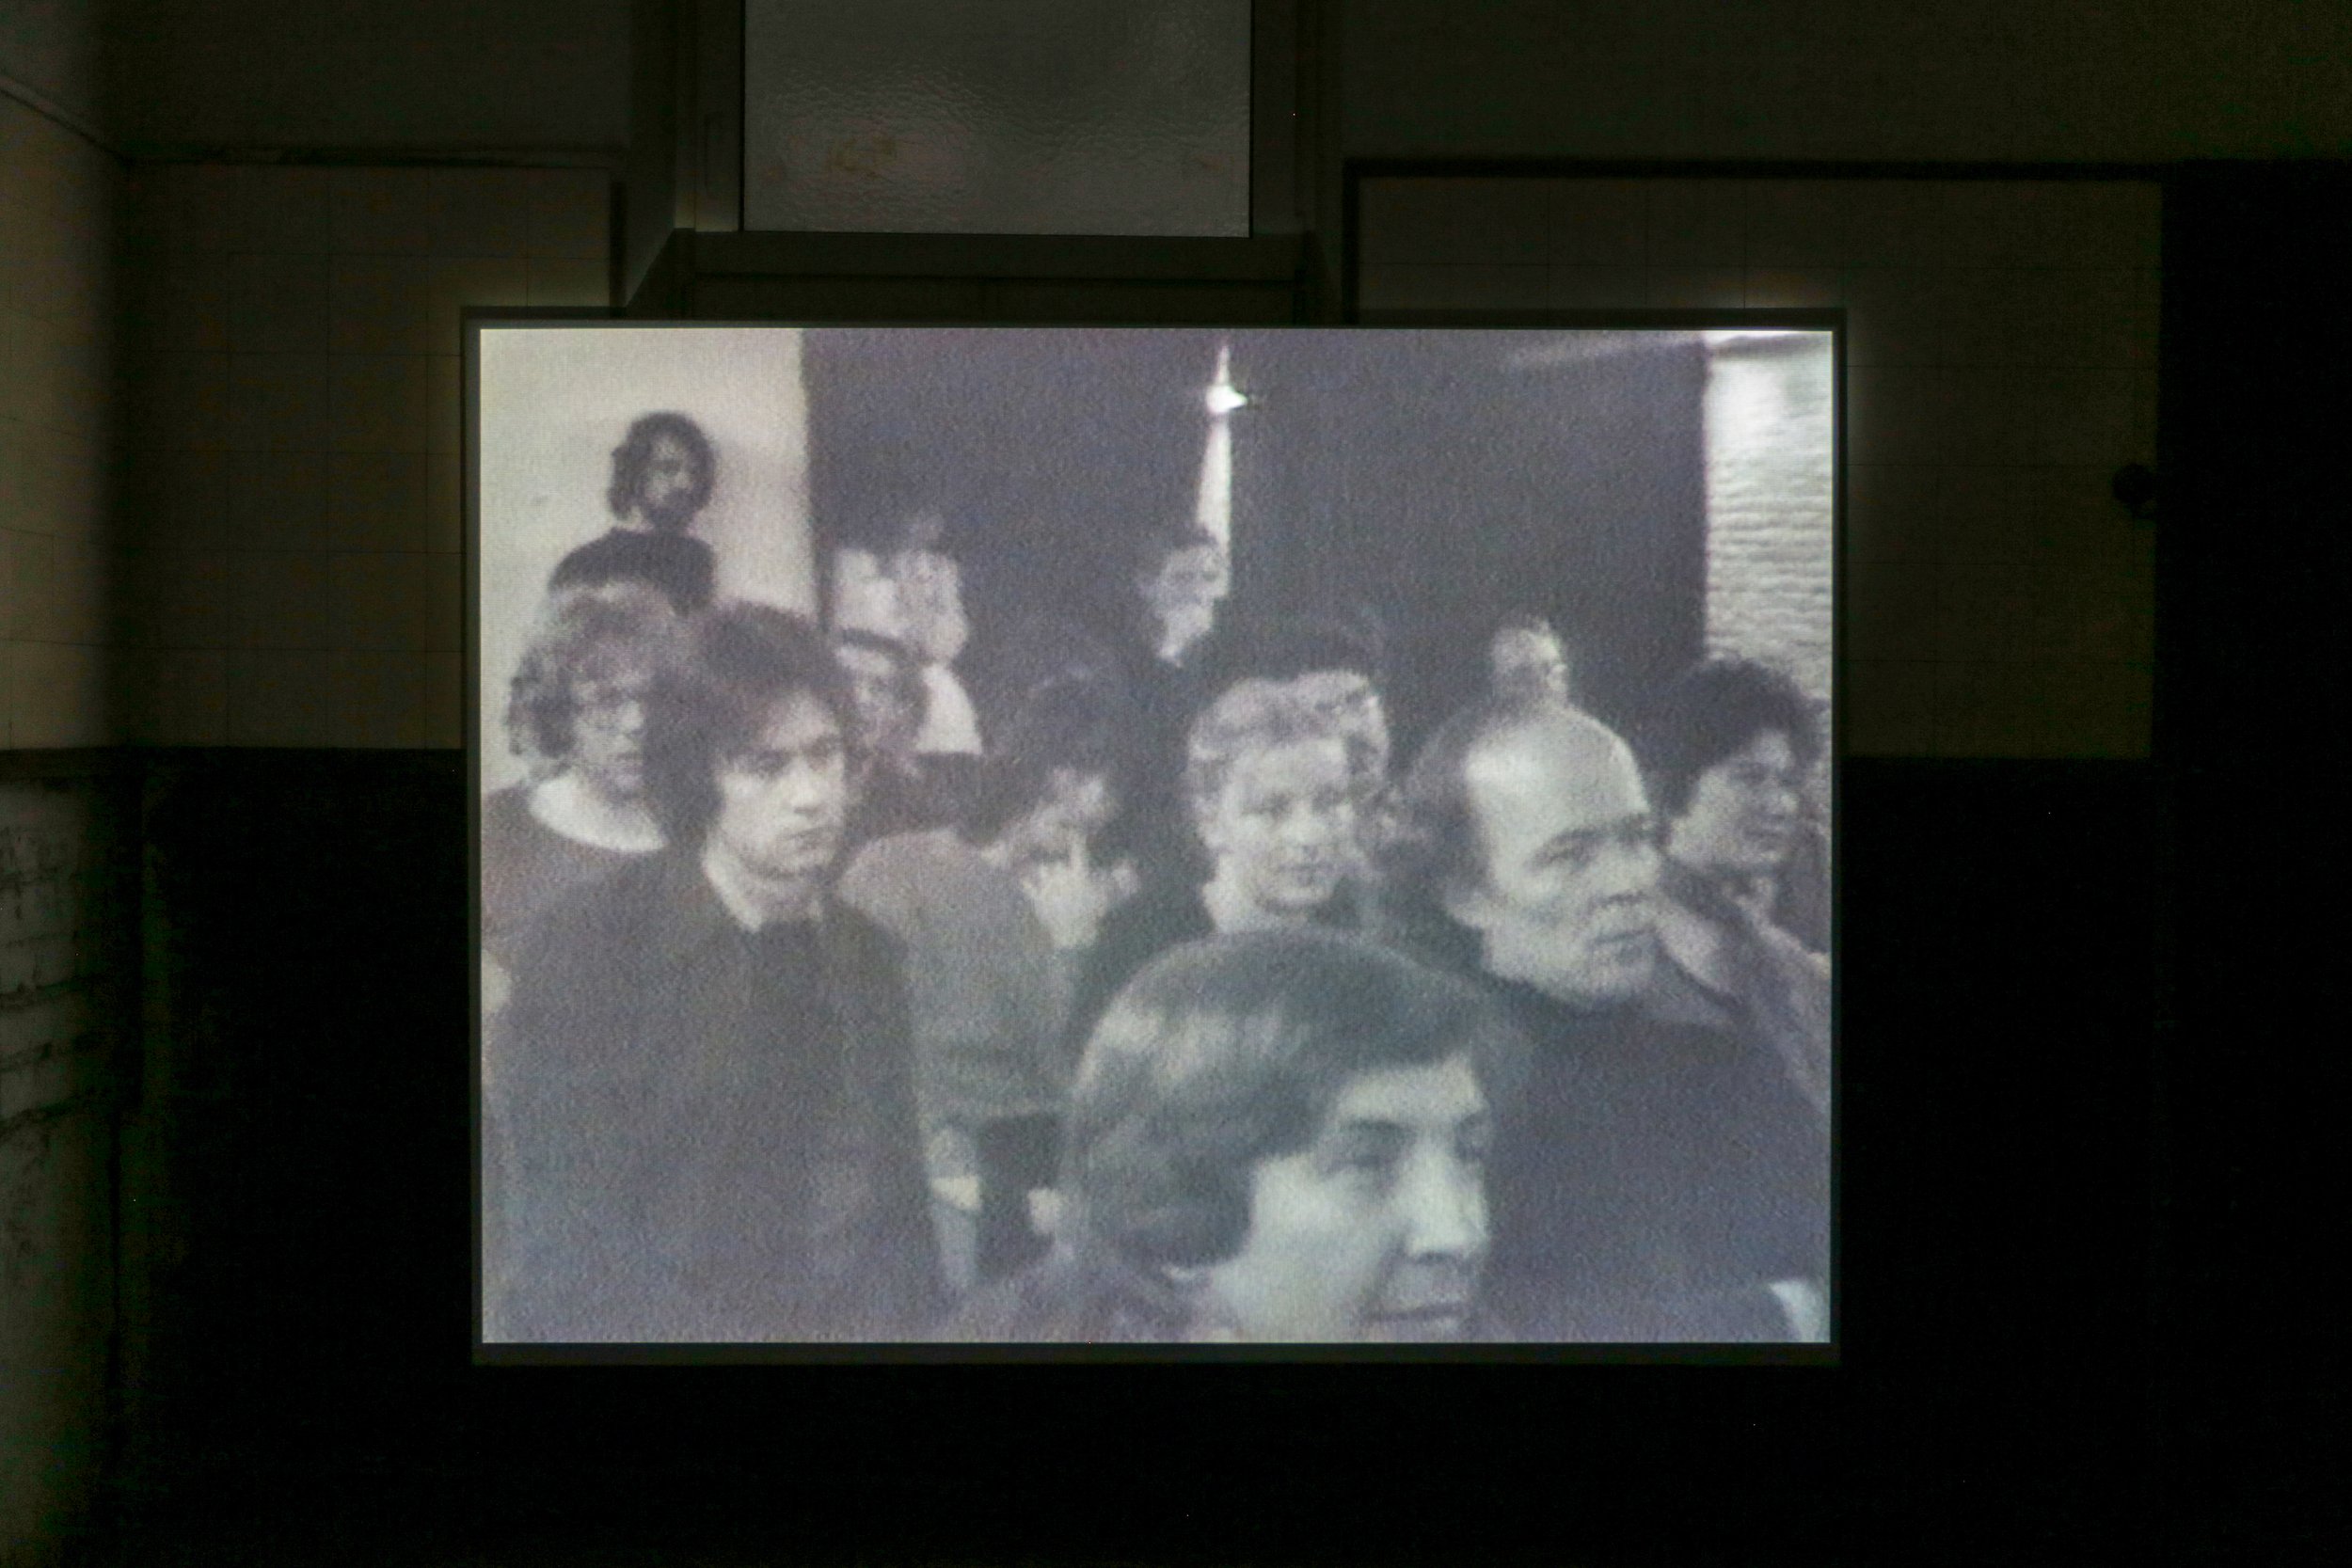   fig8 installation view Dan Graham, Audience/Performer/Mirror, 1977, 00:17:45., In collections: De Appel, LIMA  